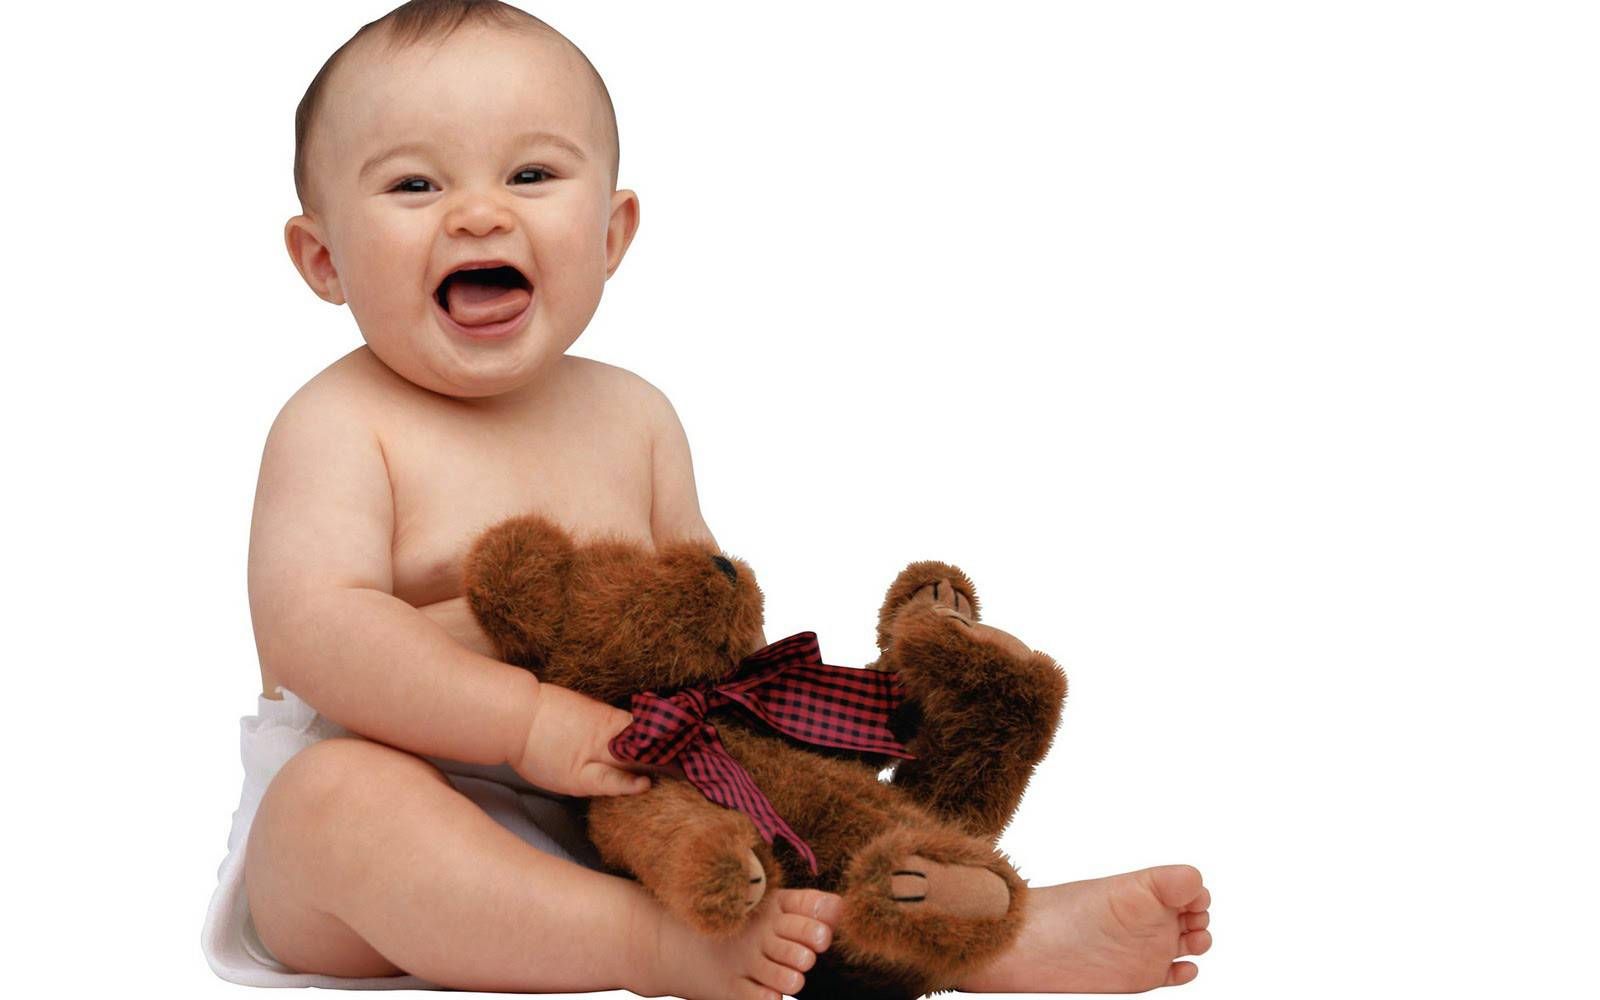 Laughing Baby 1600×1000 Laughing Baby Wallpaper. Adorable Wallpaper. Free baby stuff, Baby wallpaper, Beautiful baby image